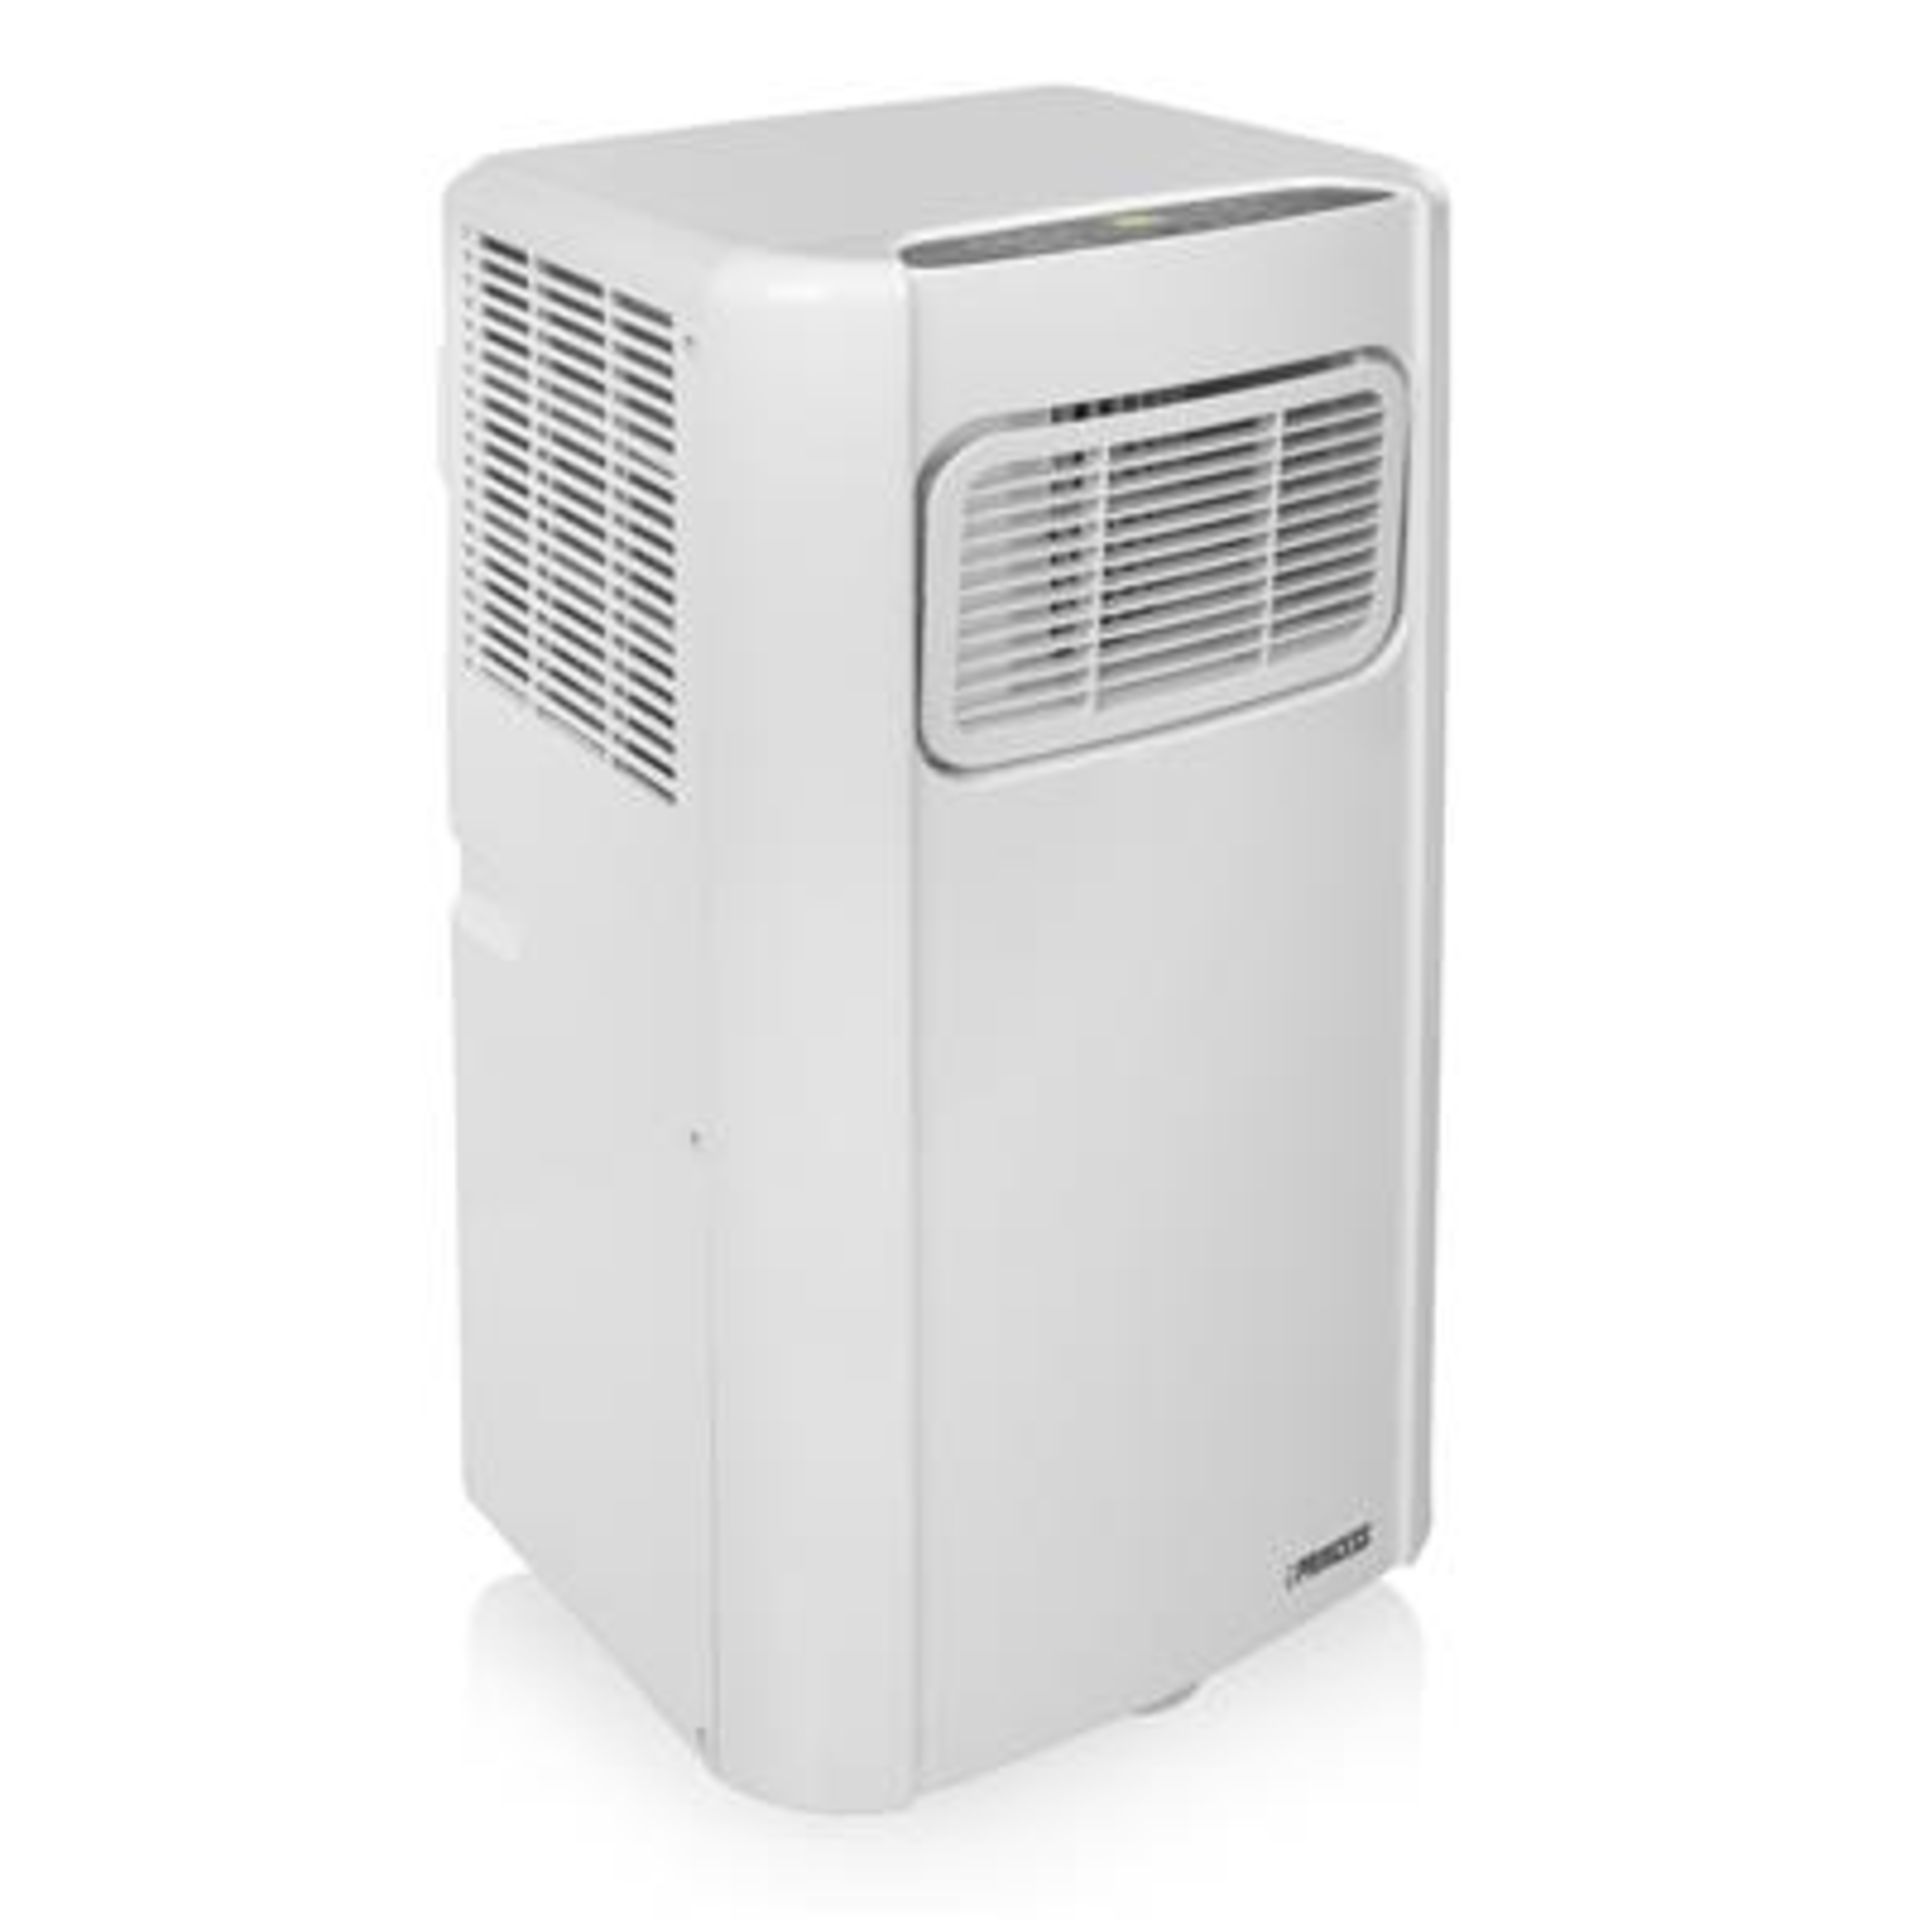 PALLET TO CONTAIN 6 x PRINCESS MOBILE AIR CONDITIONER 7000BTU, 785W, A ENERGY RATED RRP £299.99